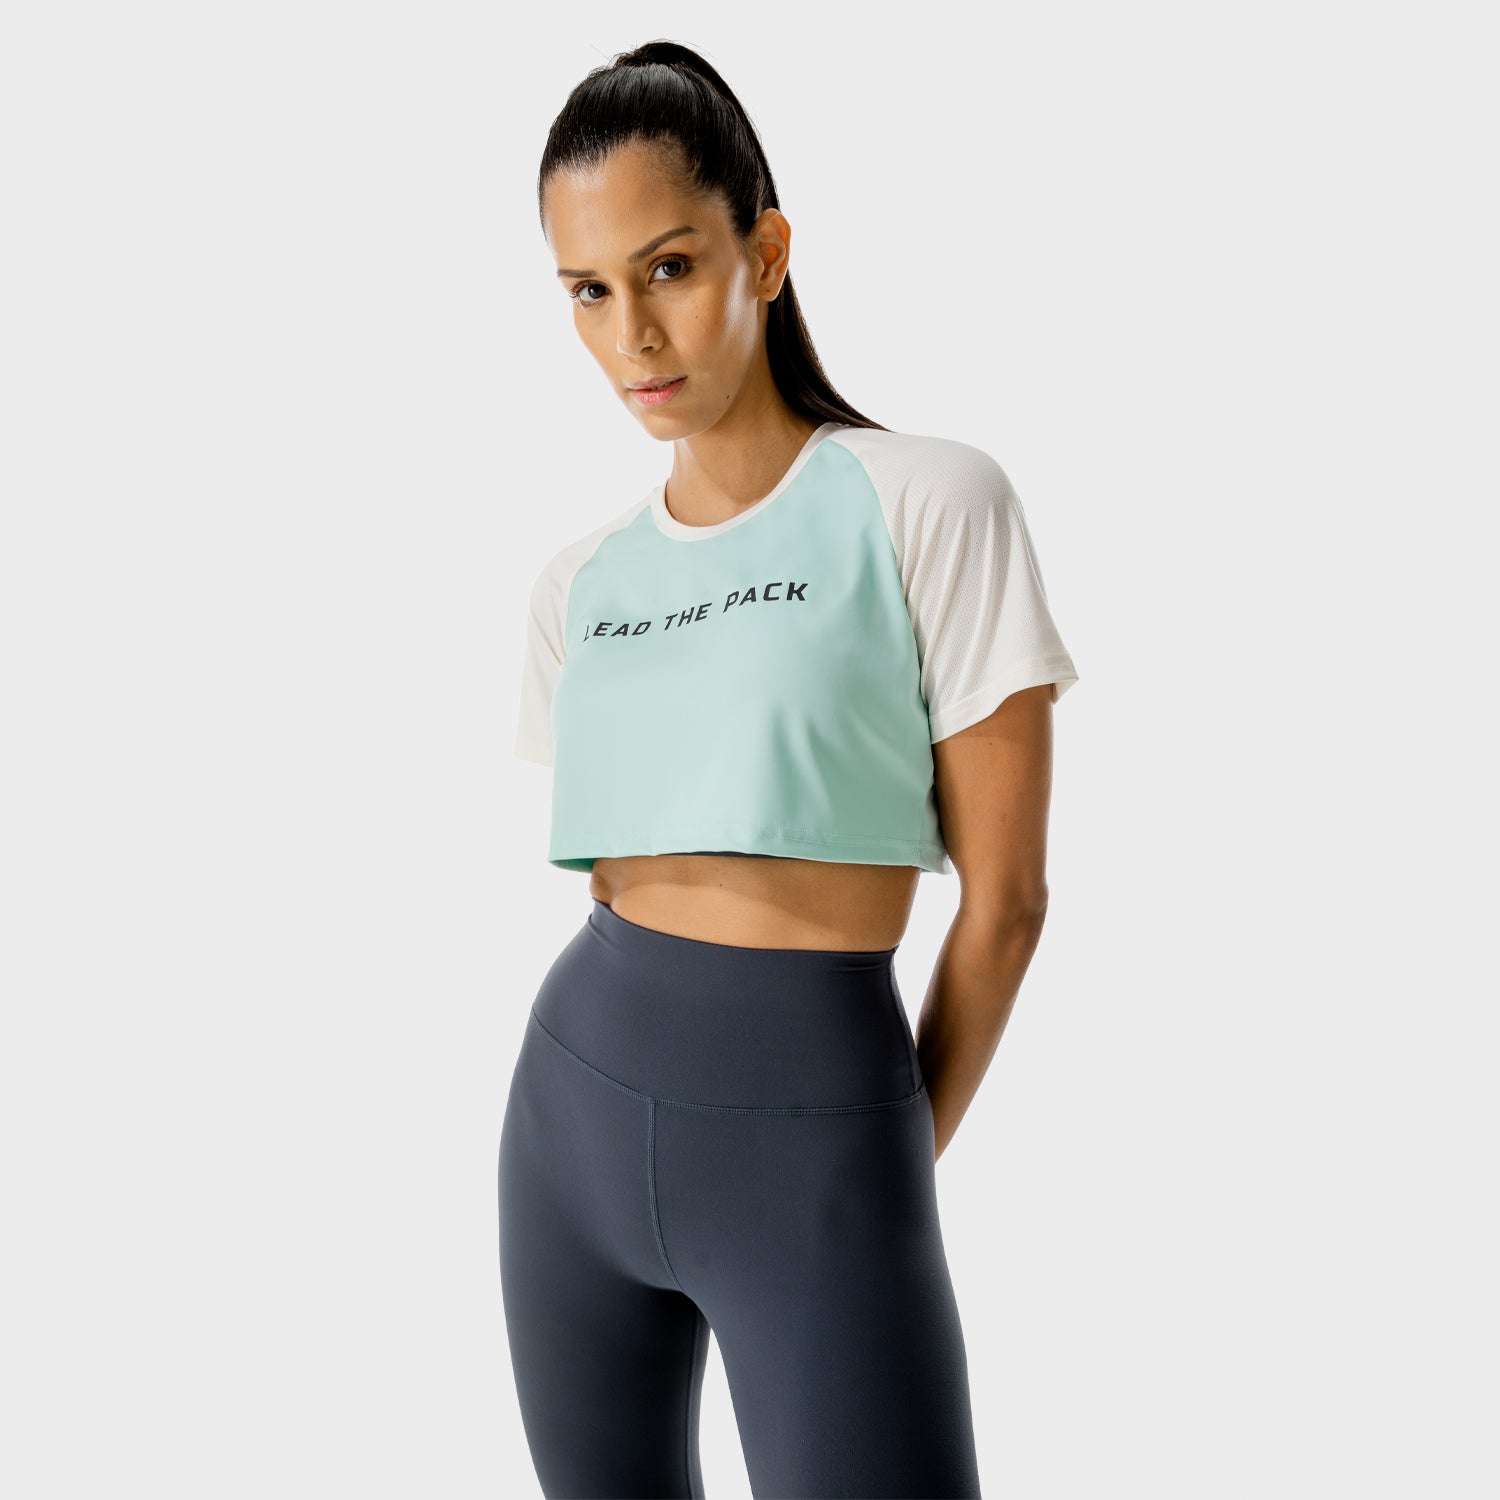 squatwolf-gym-t-shirts-for-women-lab-360-crop-tee-whisper-white-workout-clothes